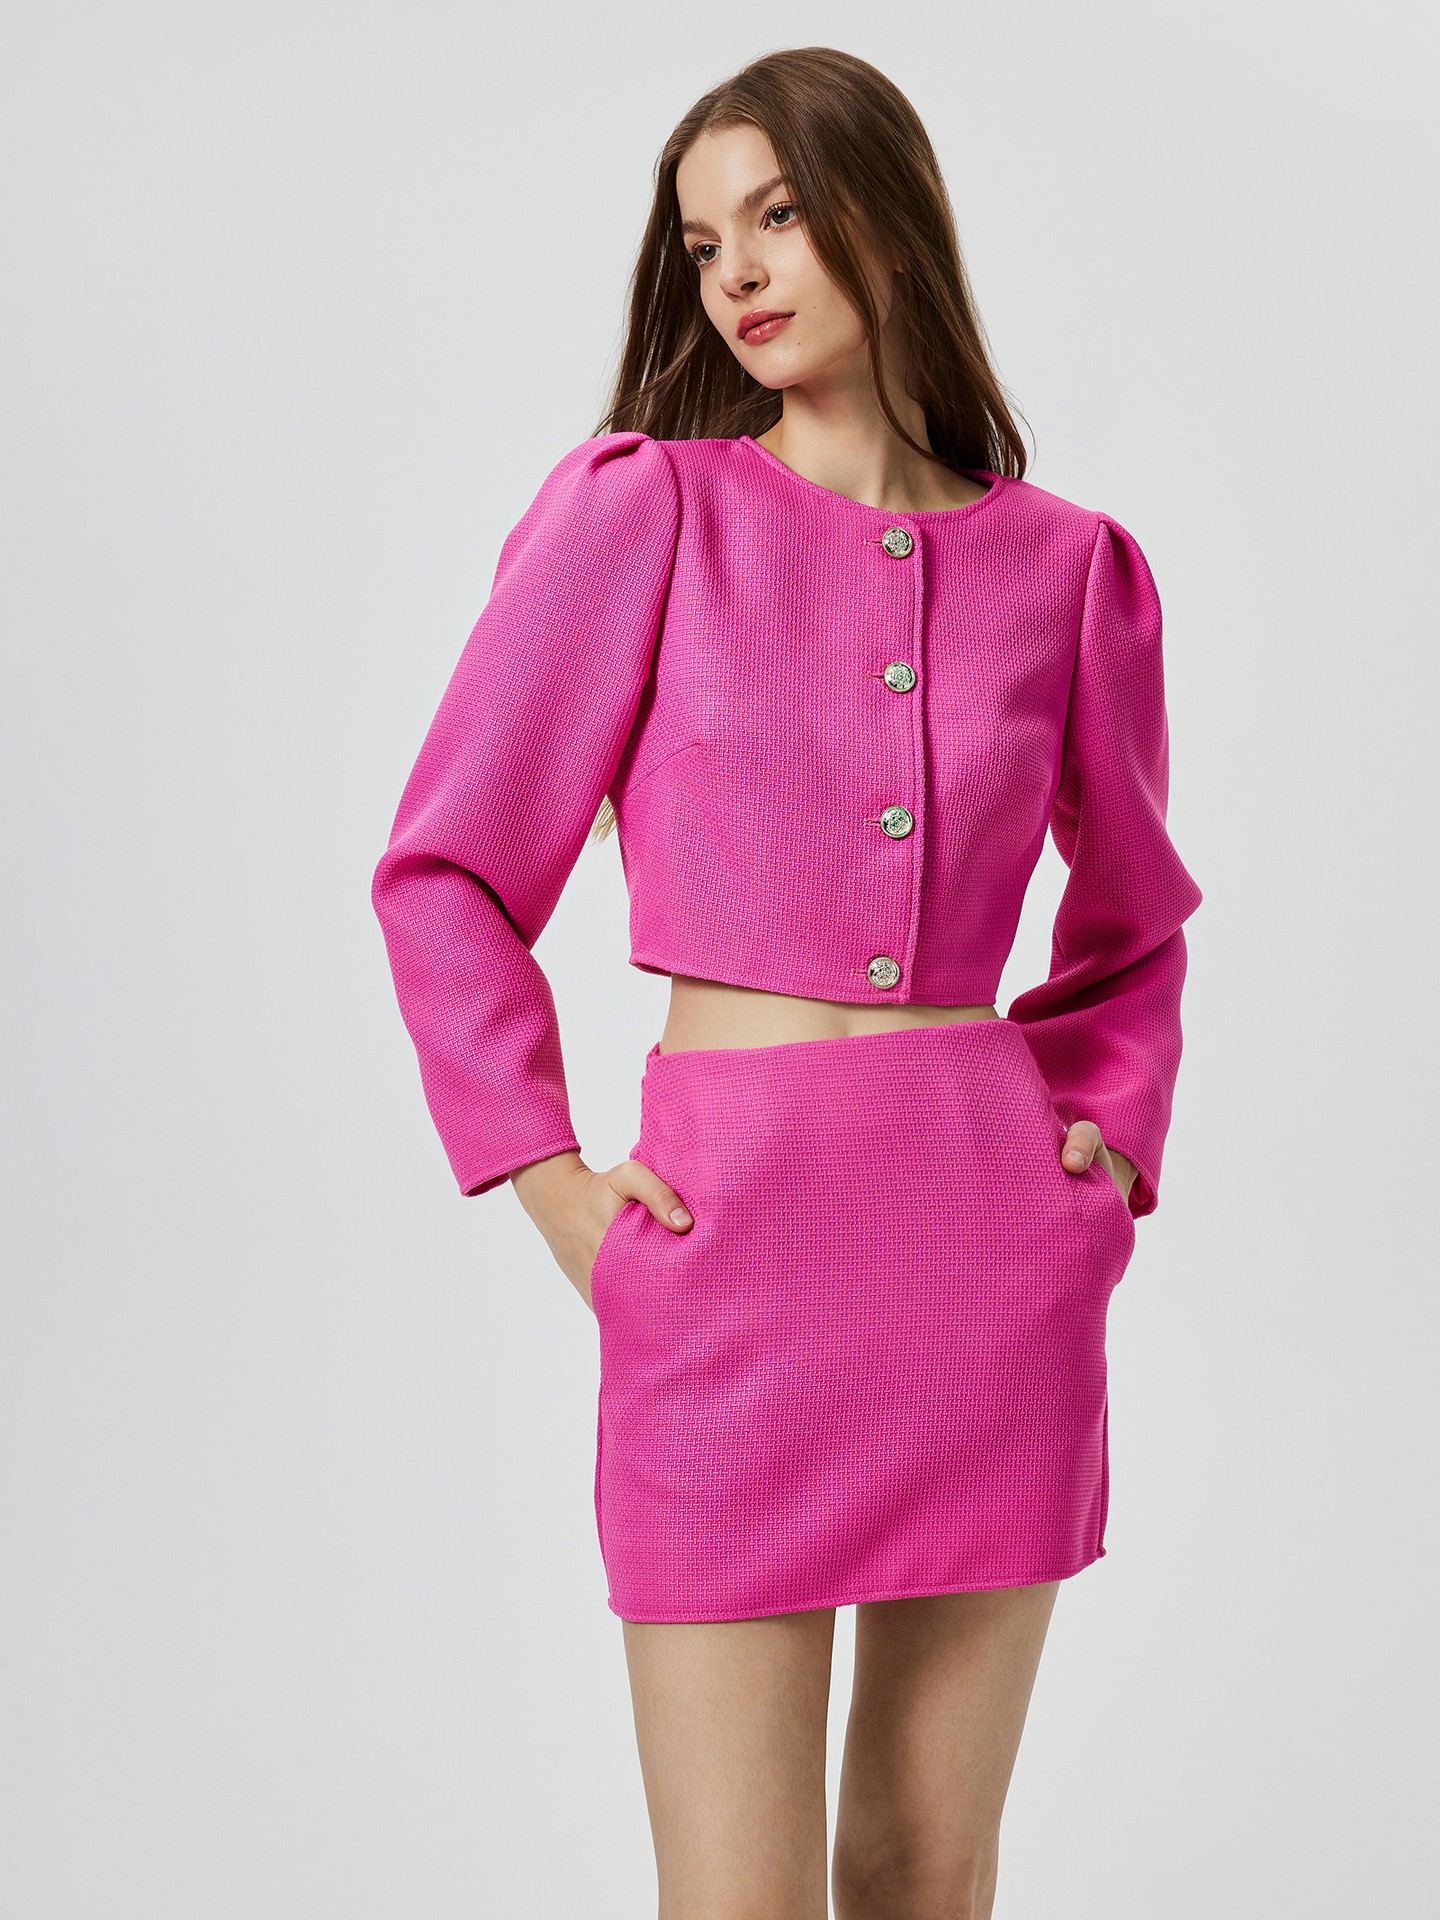 Texture Jacket And Skirt Co-ord Set丨Urbanic Most, 53% OFF